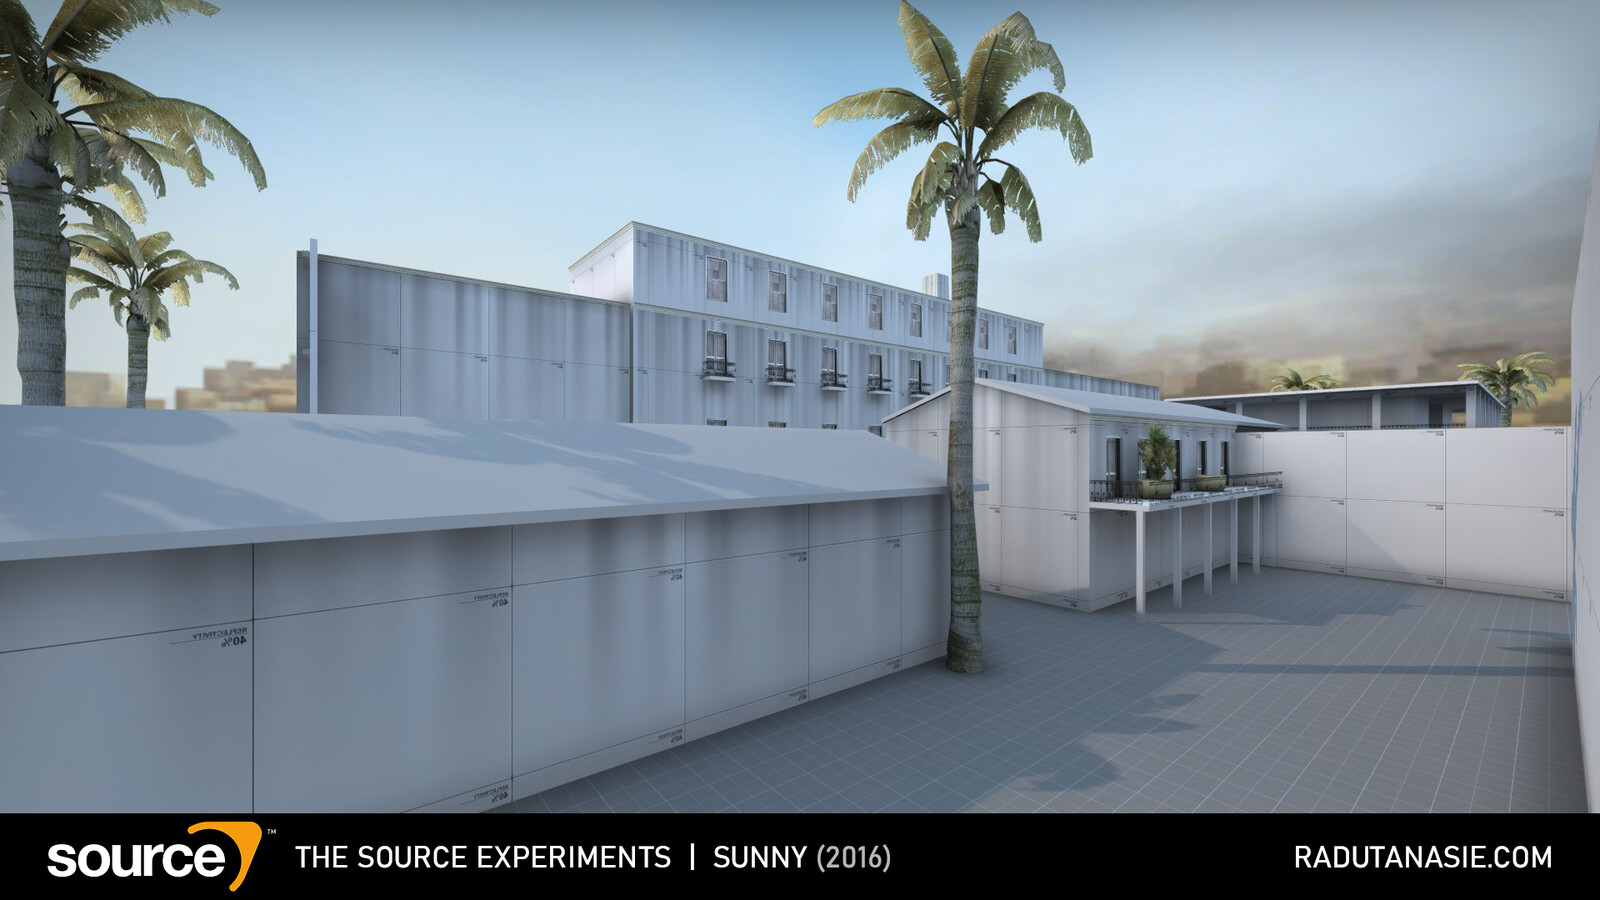 Sunny was another more successful attempt at creating a Counter-Strike map. However, the layout had issues and I dropped the project in preparation for my university exams.